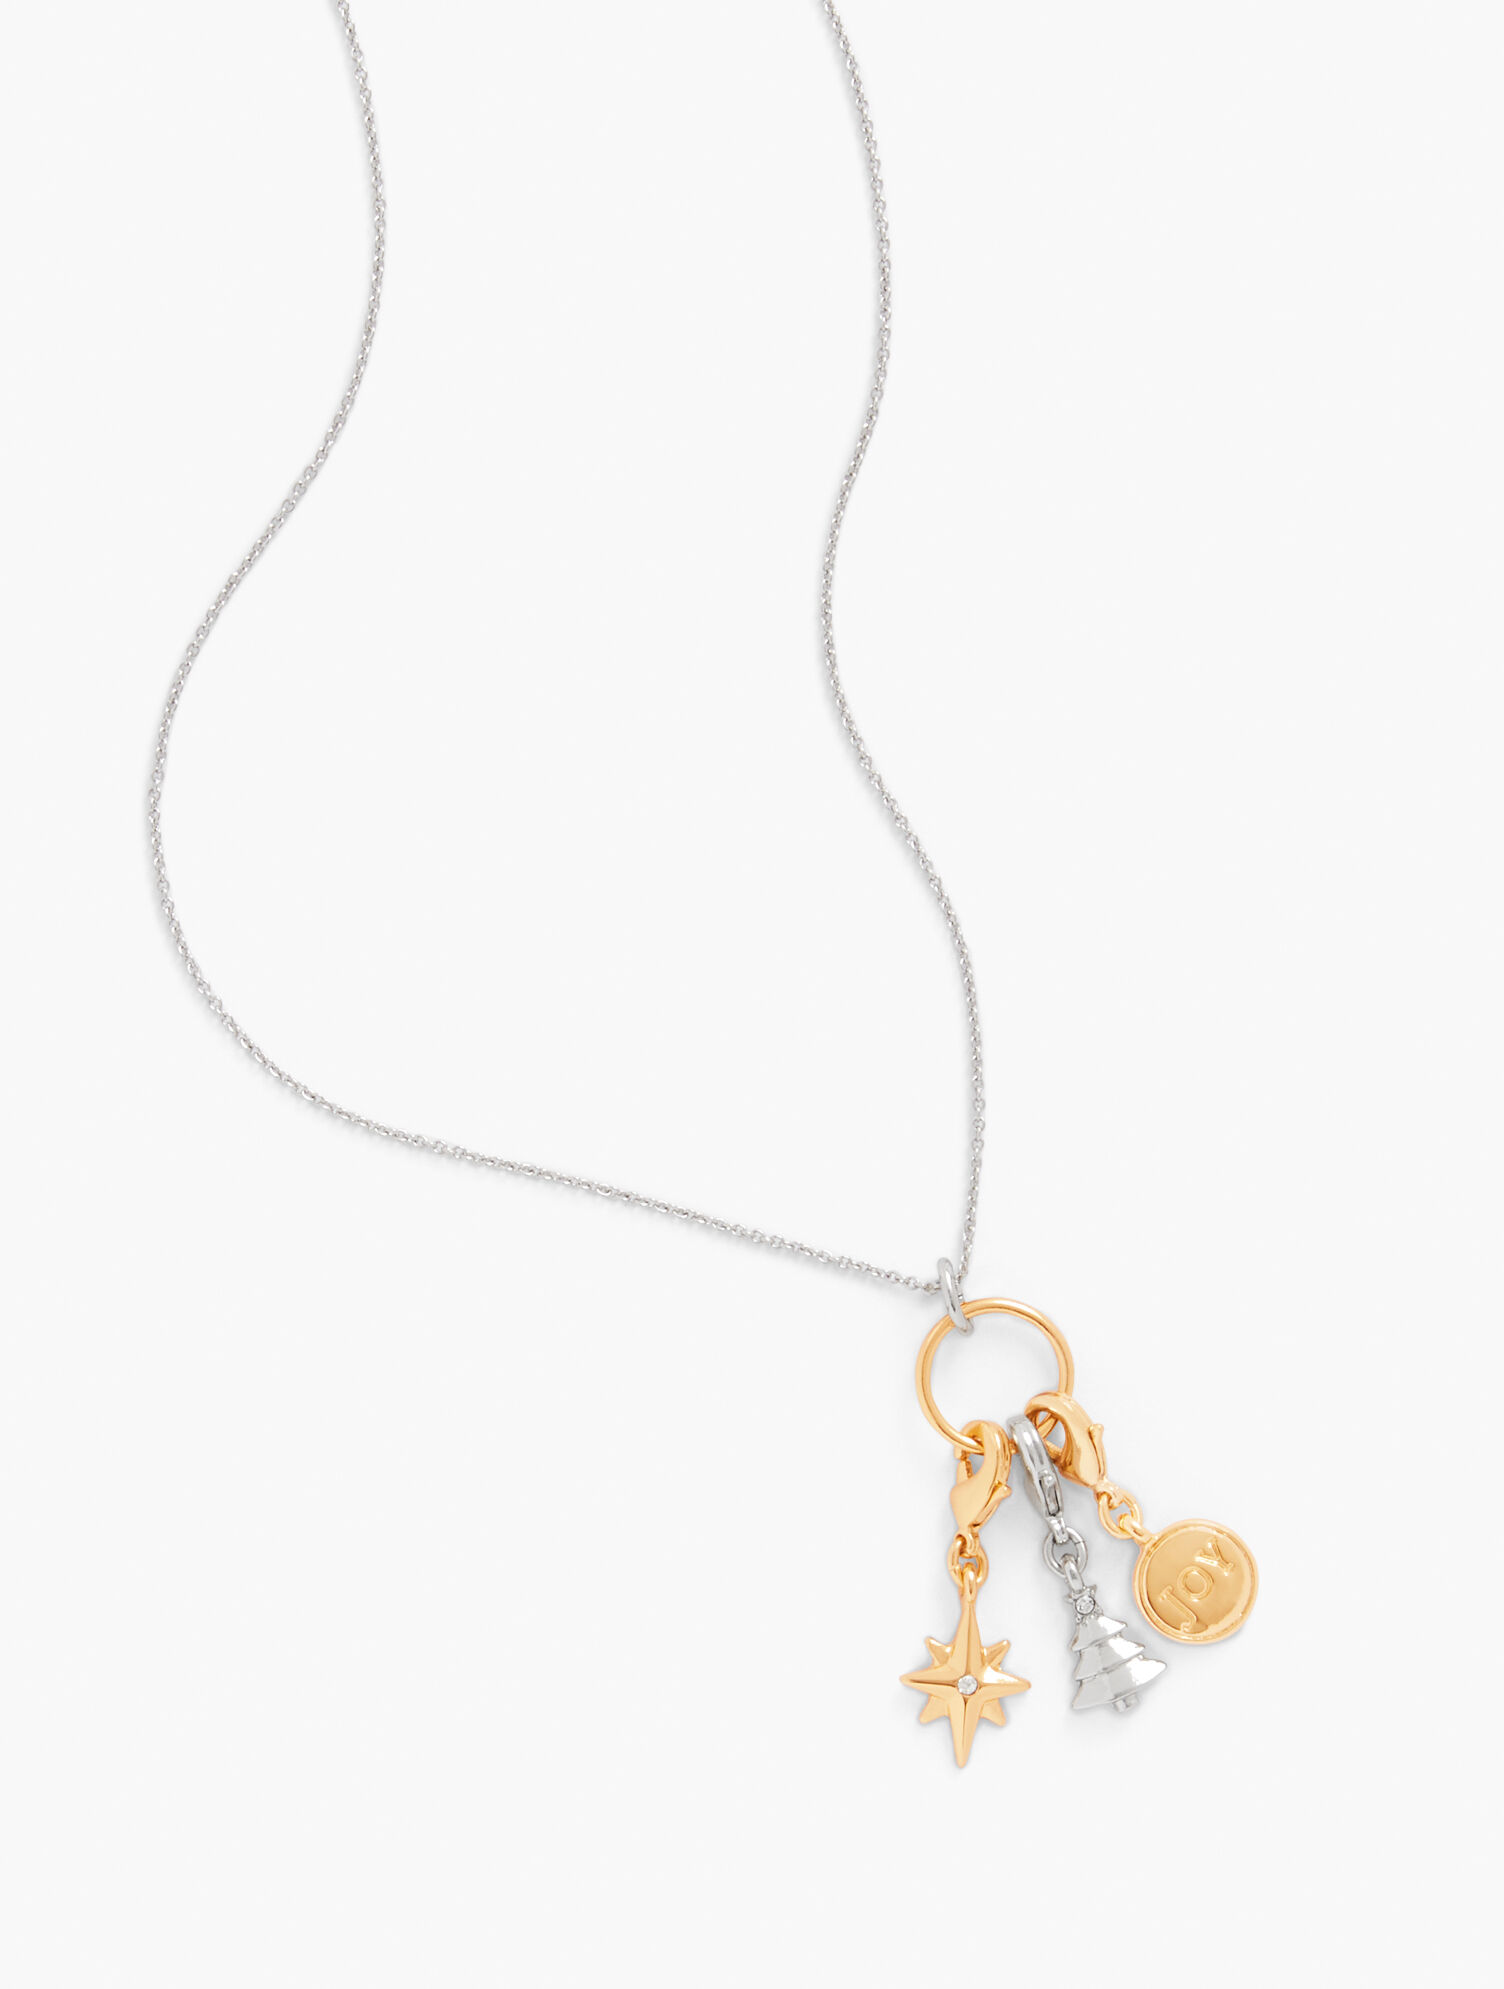 12 Days Of Charm Necklace Gift Set | Talbots